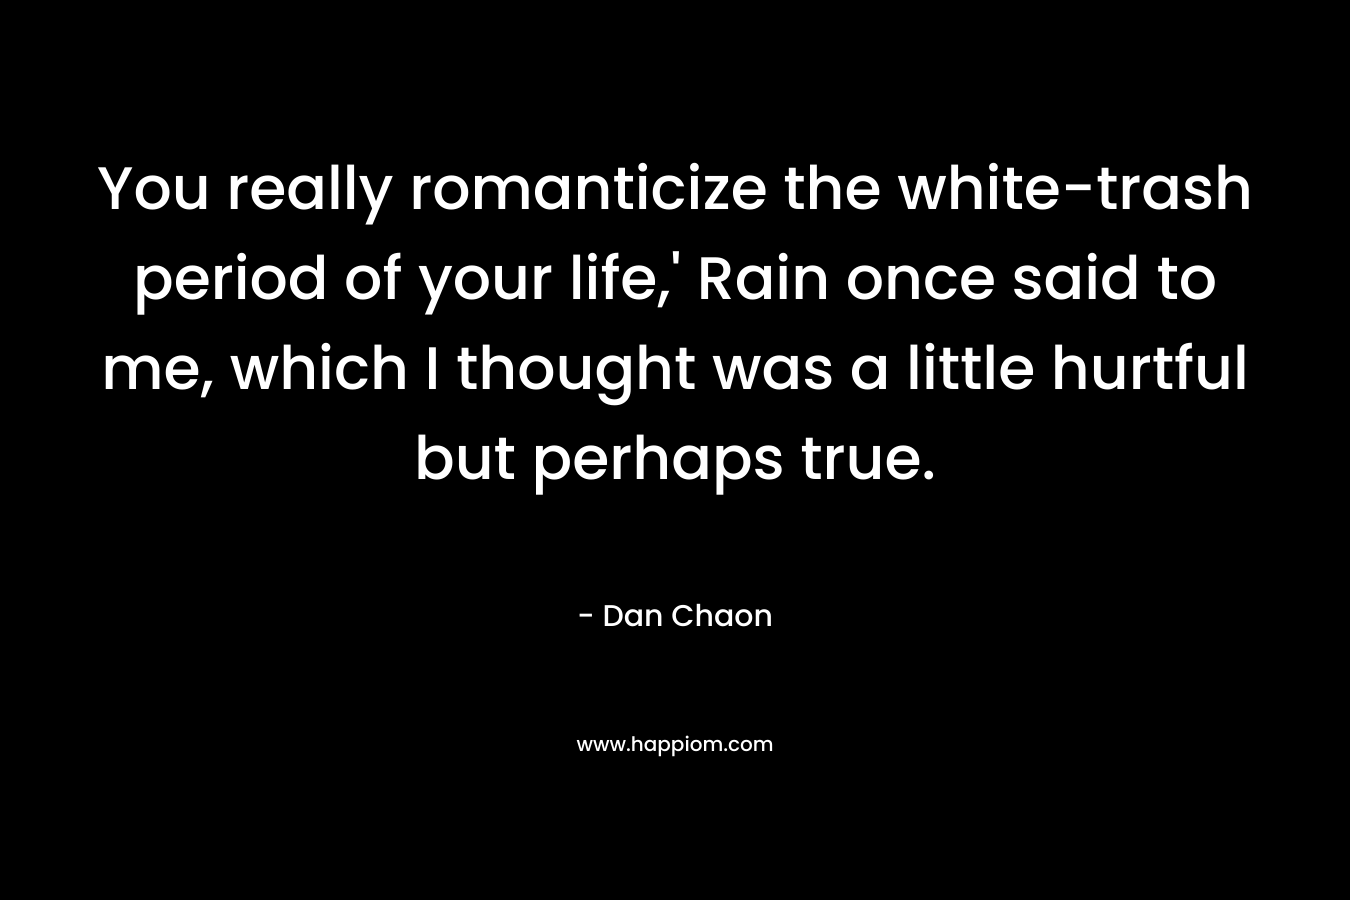 You really romanticize the white-trash period of your life,’ Rain once said to me, which I thought was a little hurtful but perhaps true. – Dan Chaon